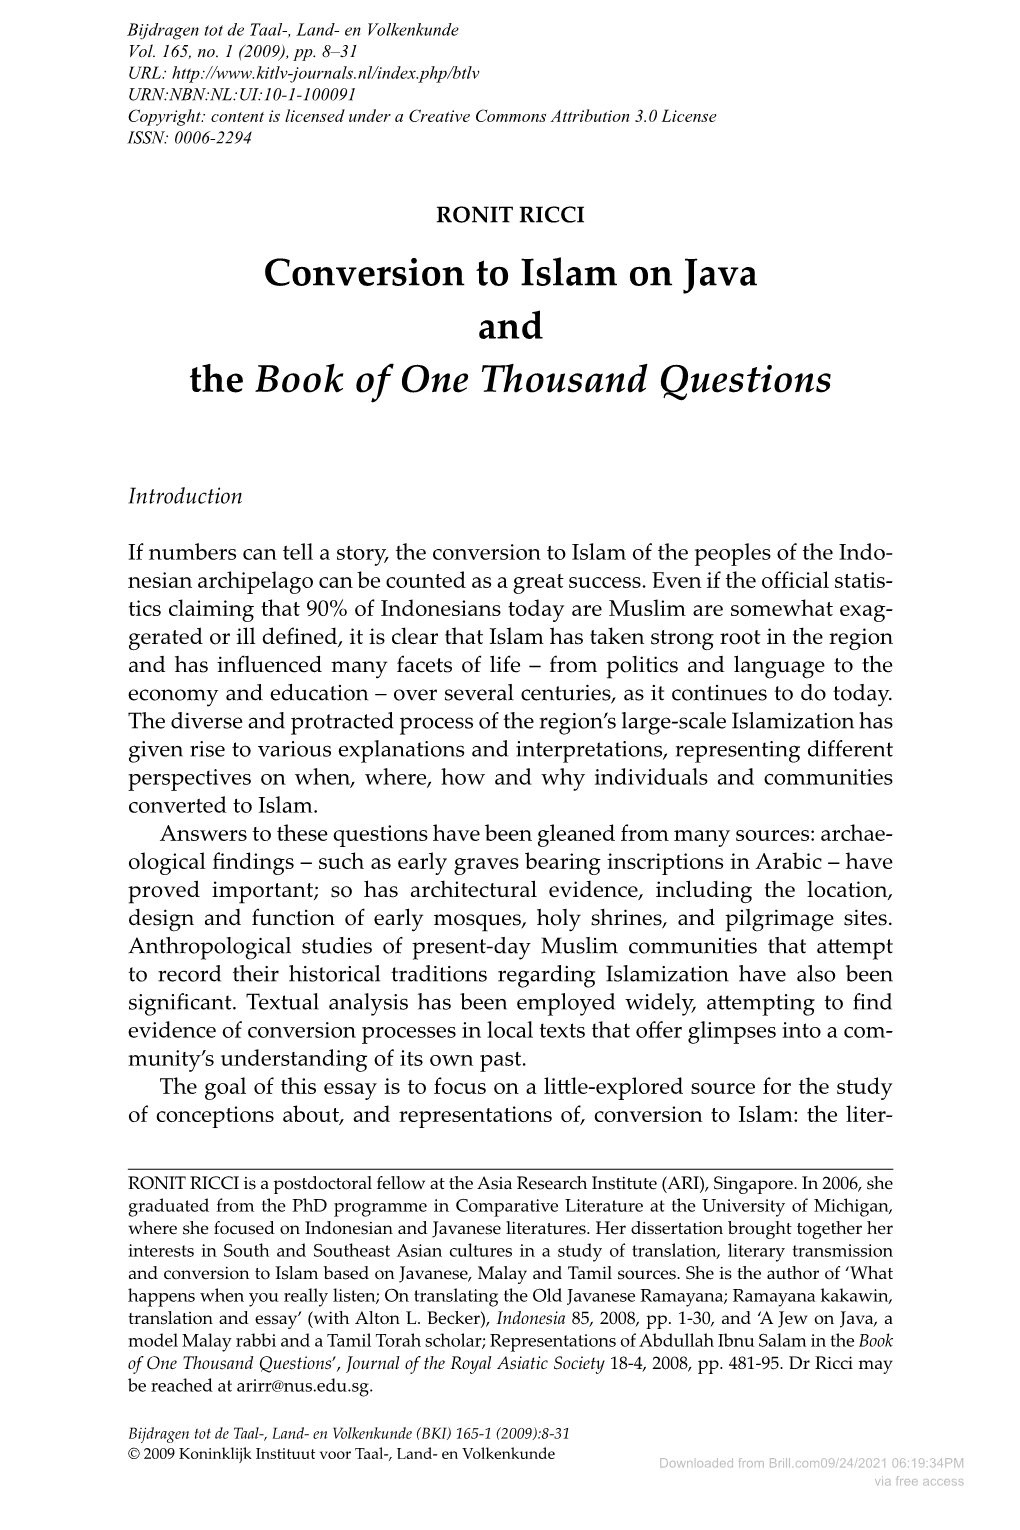 Conversion to Islam on Java and the Book of One Thousand Questions